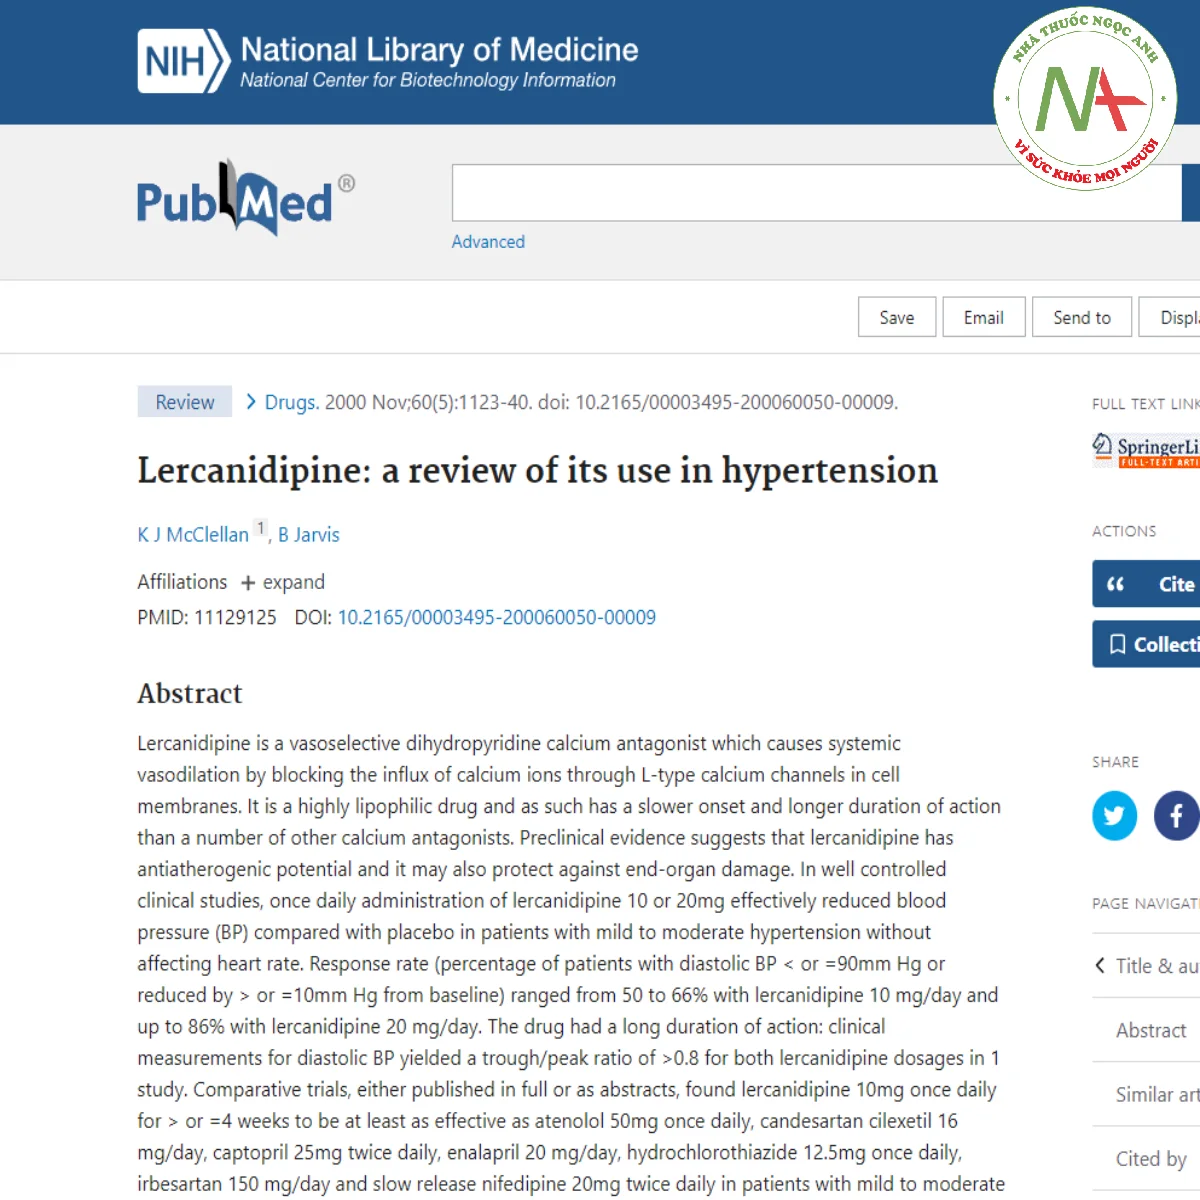 Lercanidipine: a review of its use in hypertension